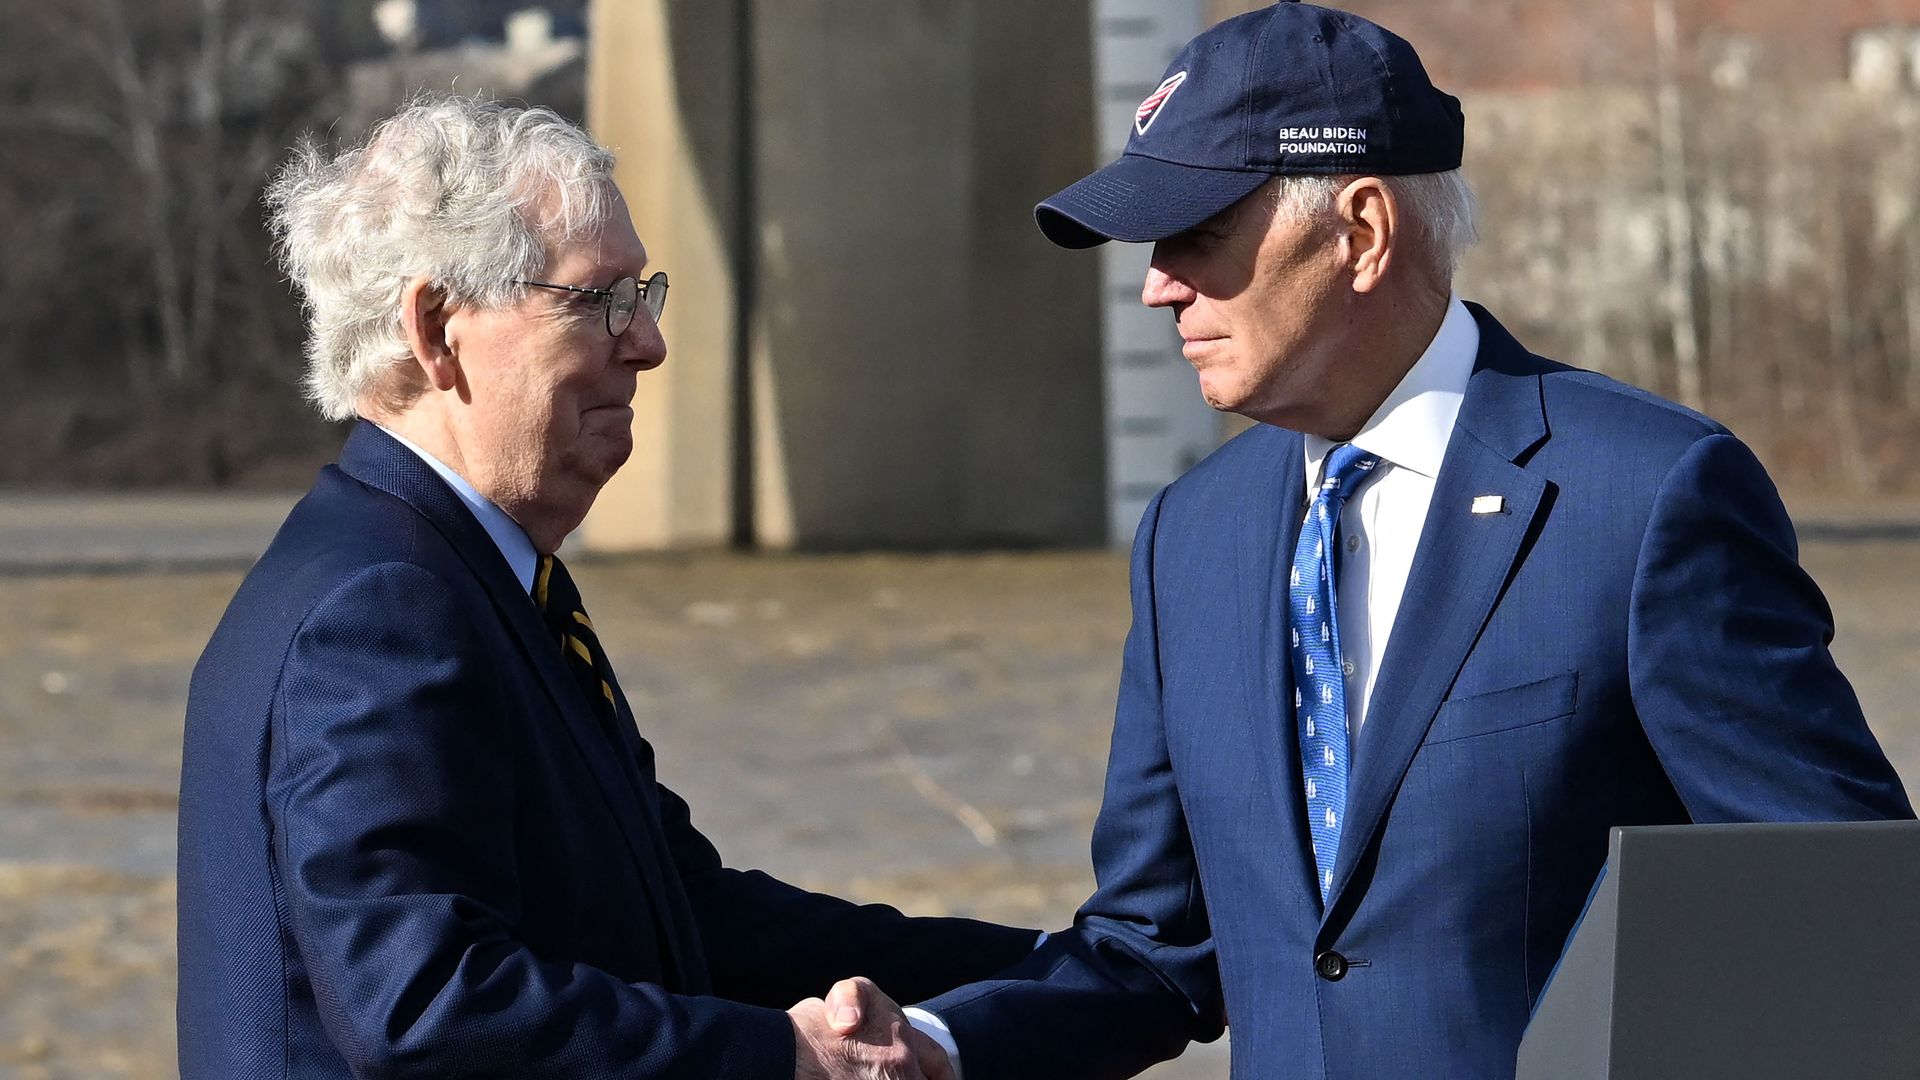 Biden and McConnell shaking hands